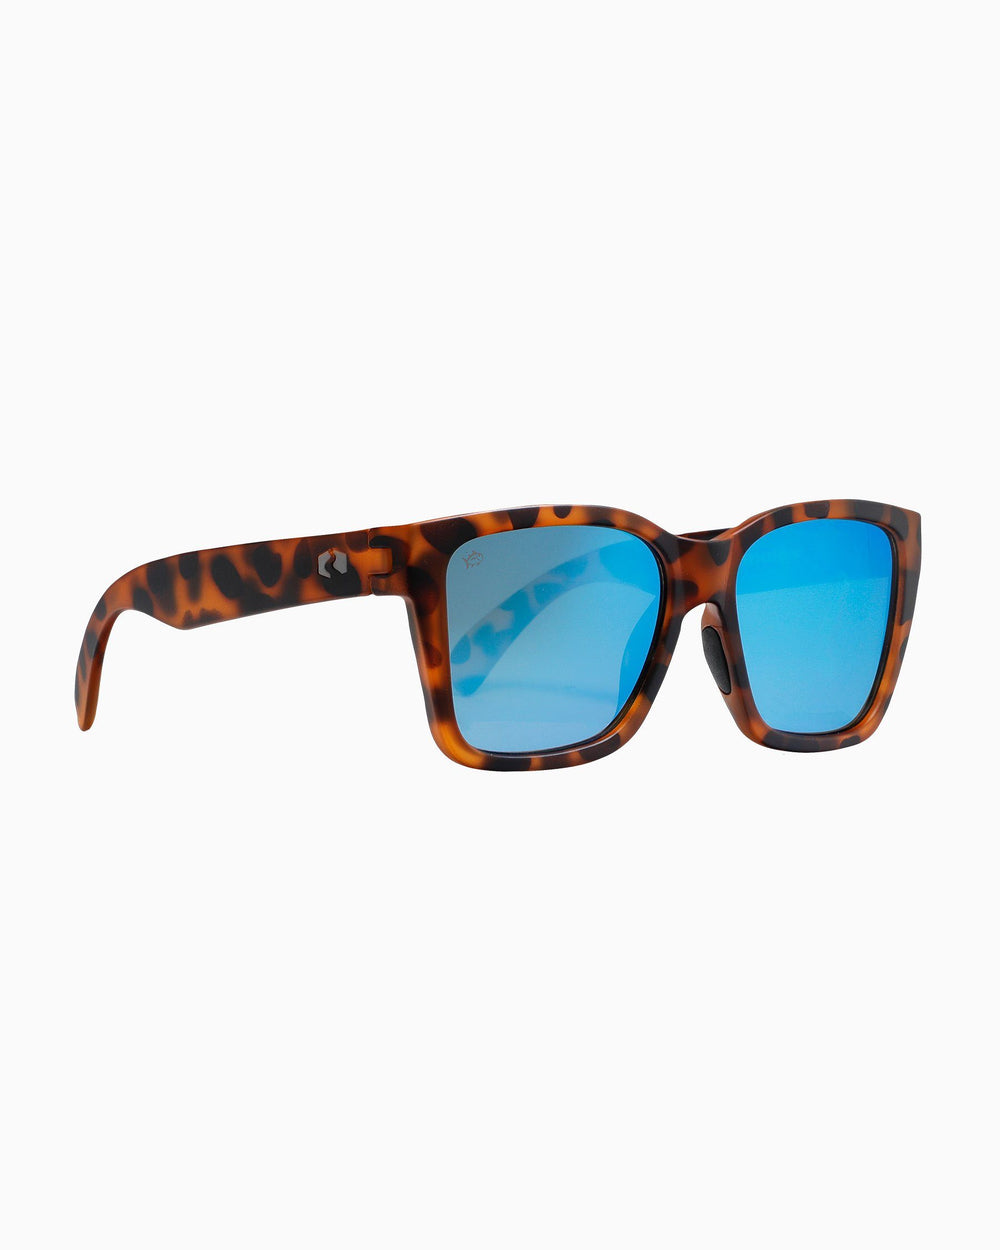 The side of the Rheos Edistos Sunglasses by Southern Tide - Tortoise Marine